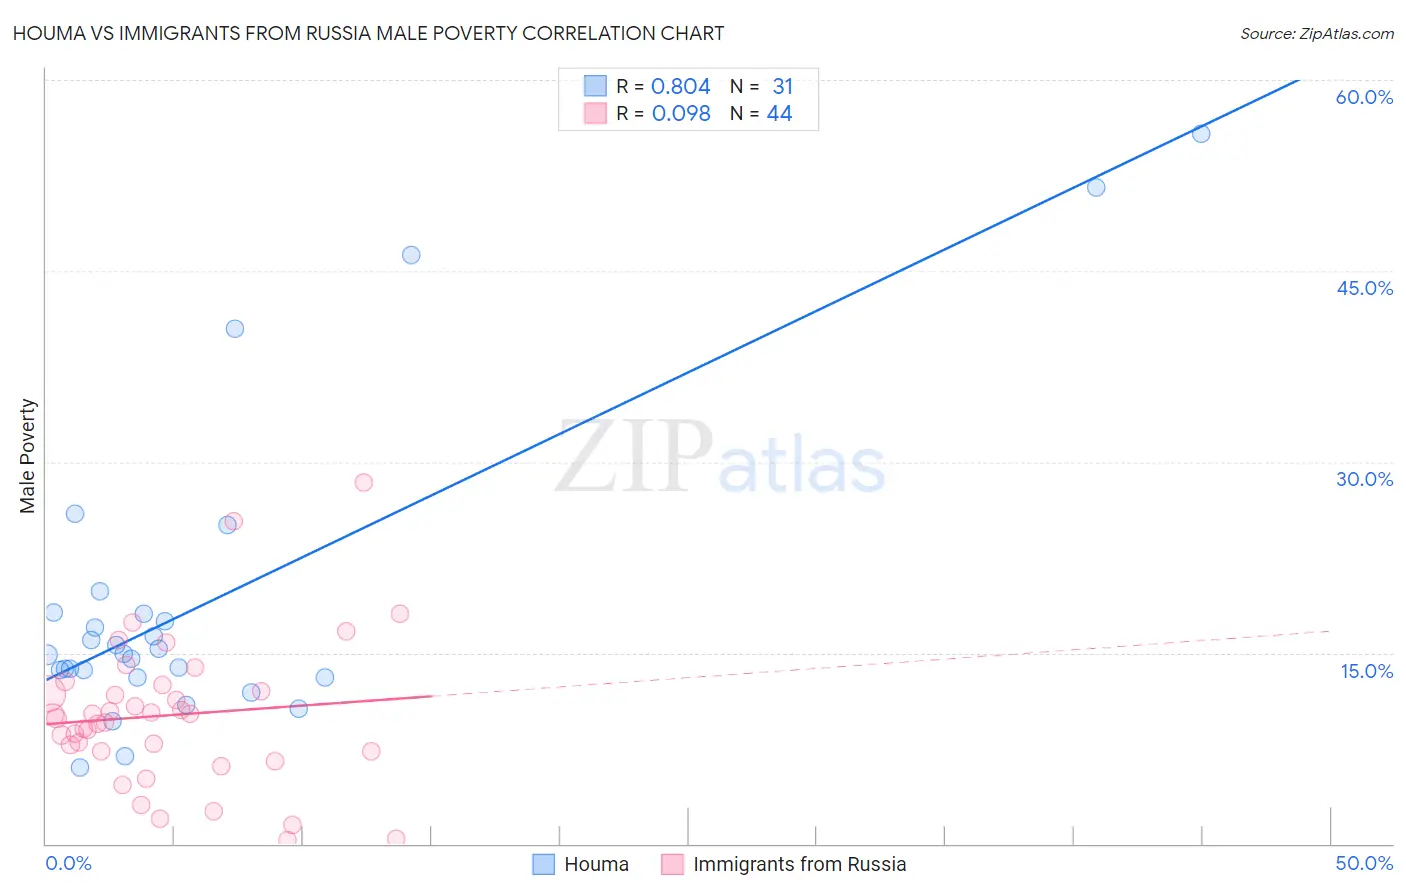 Houma vs Immigrants from Russia Male Poverty